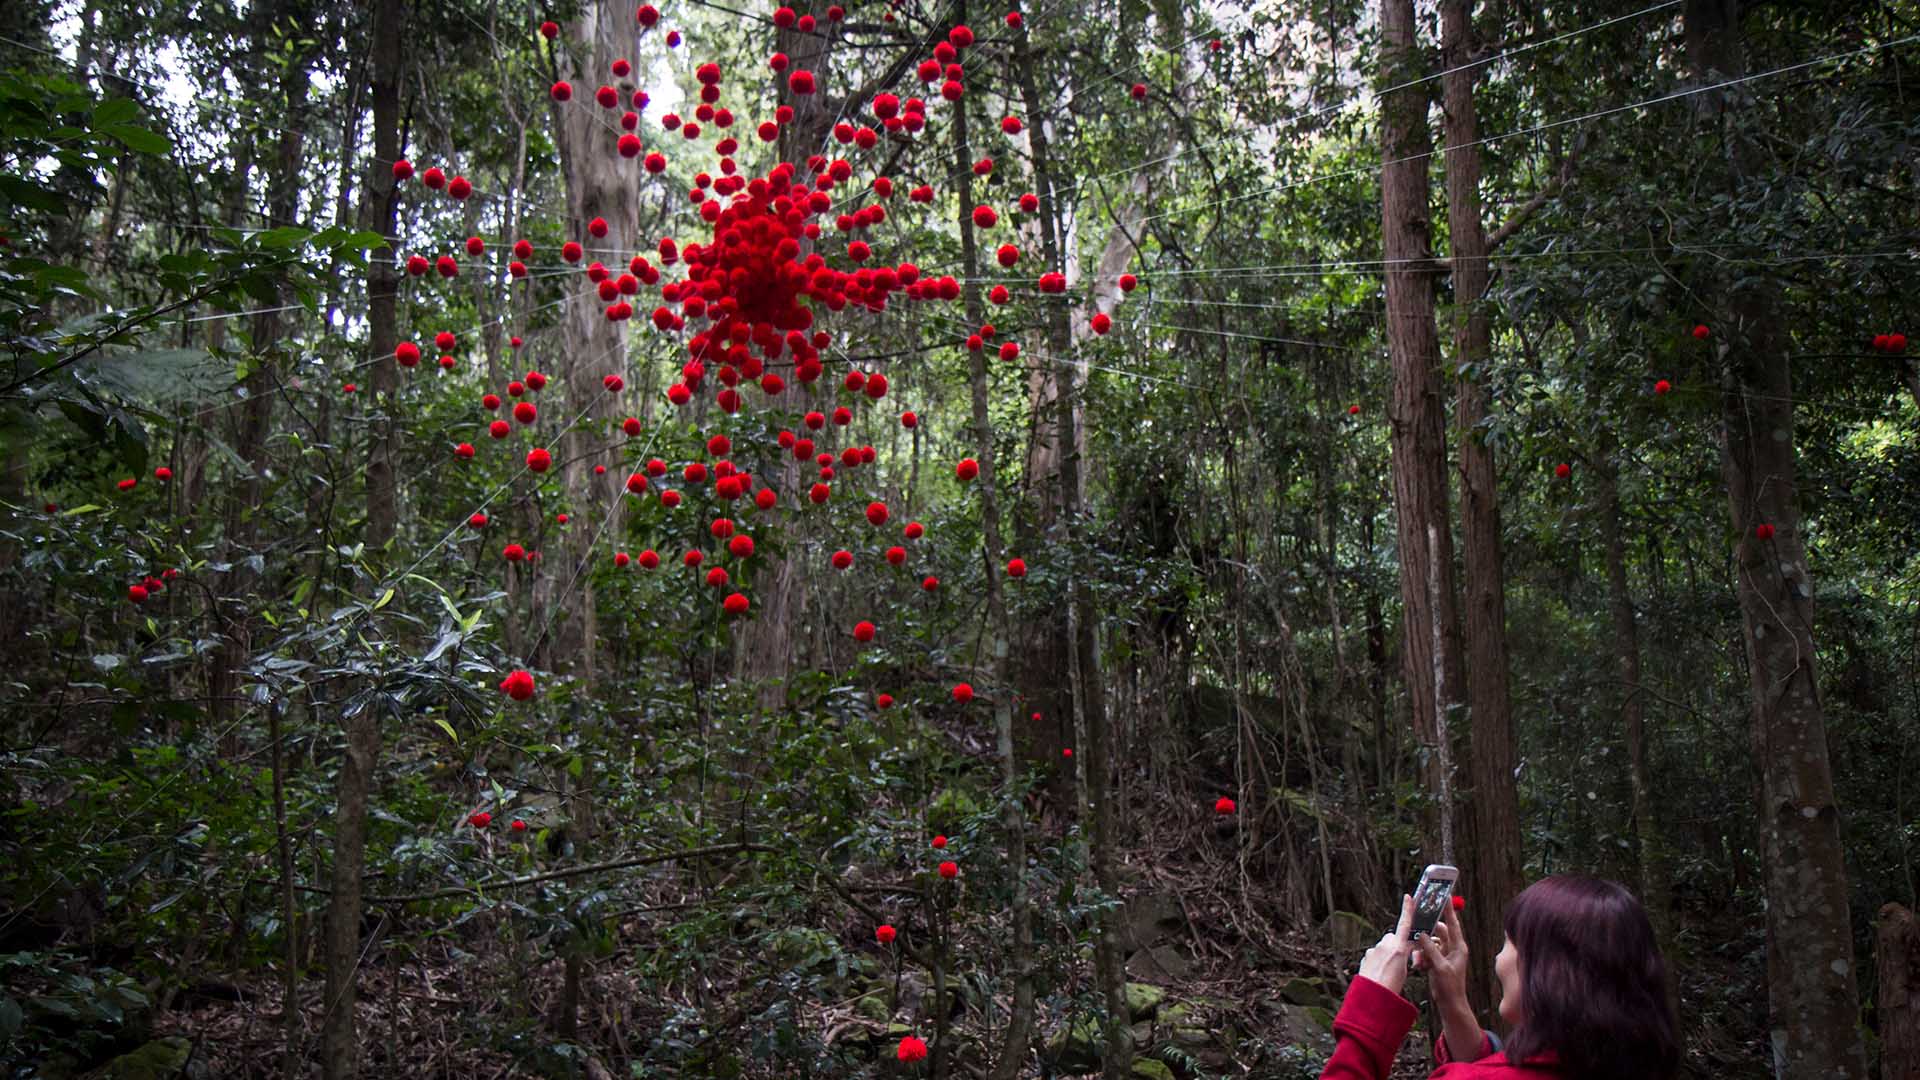 There's a Pop-Up Sculpture Gallery in the Blue Mountains Rainforest